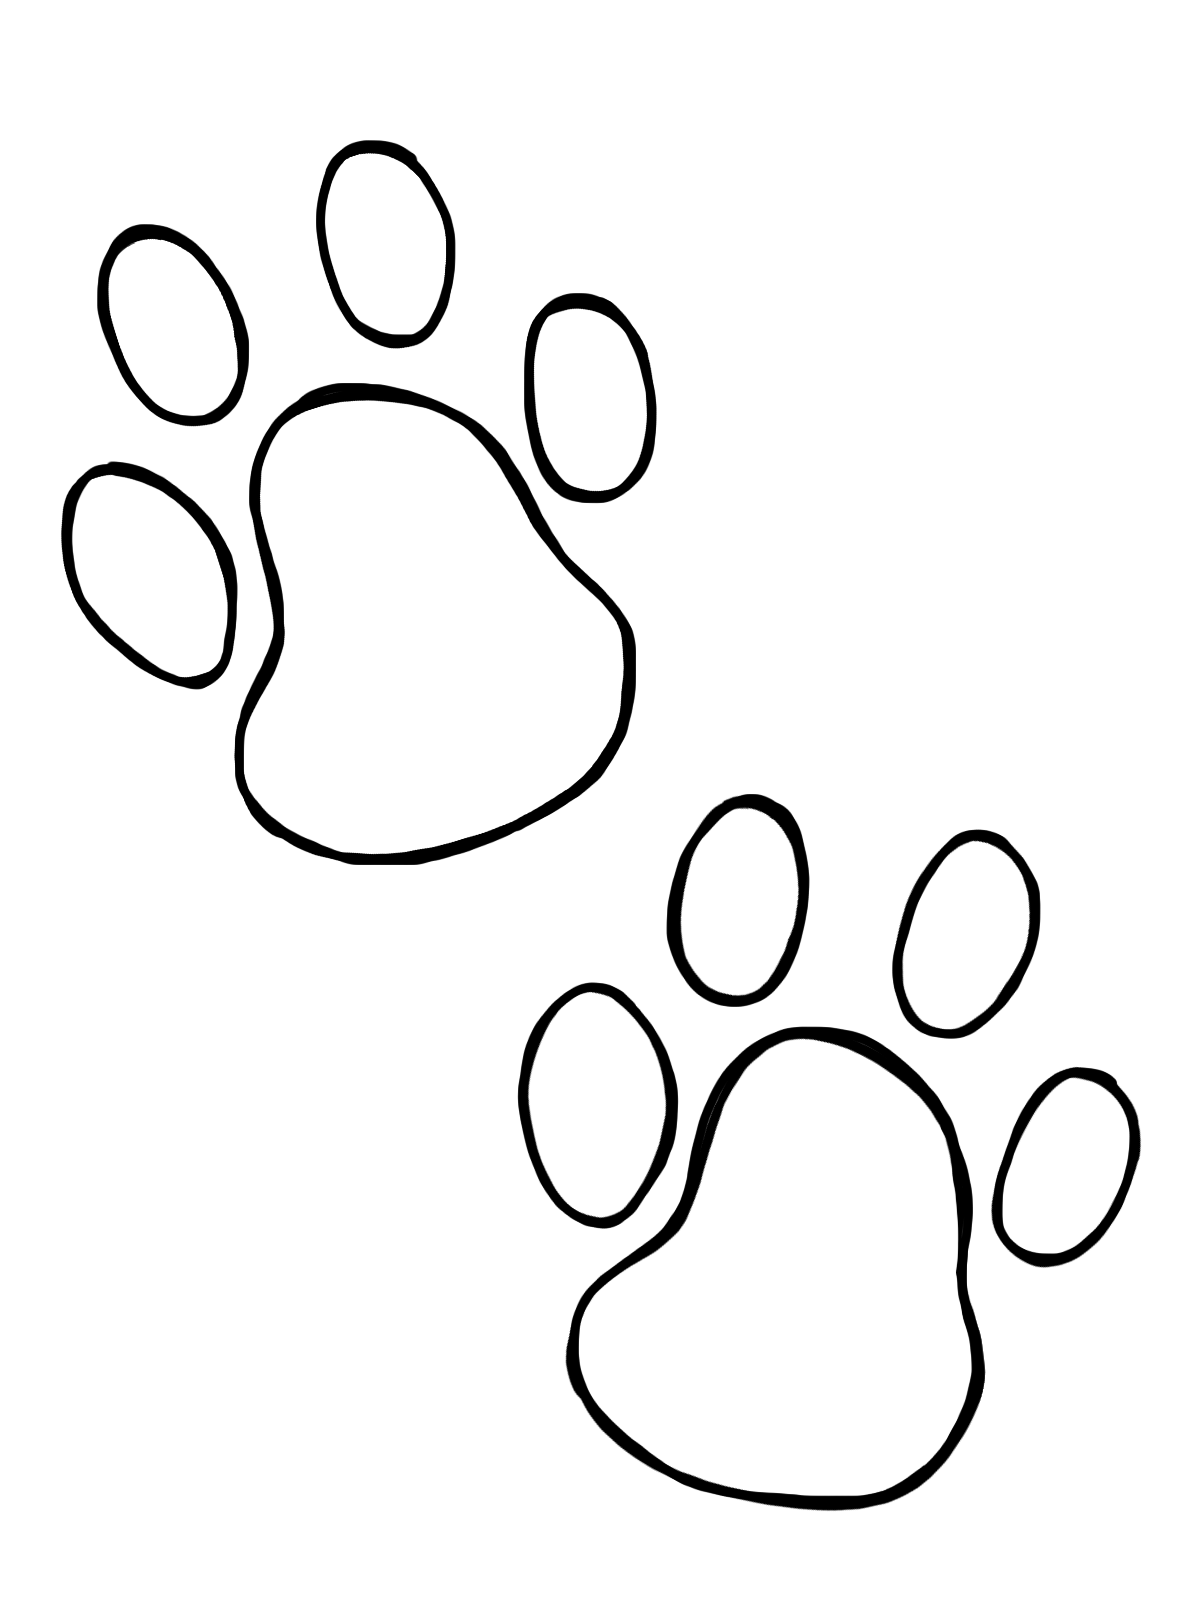 Paw clipart ucla, Paw ucla Transparent FREE for download on.